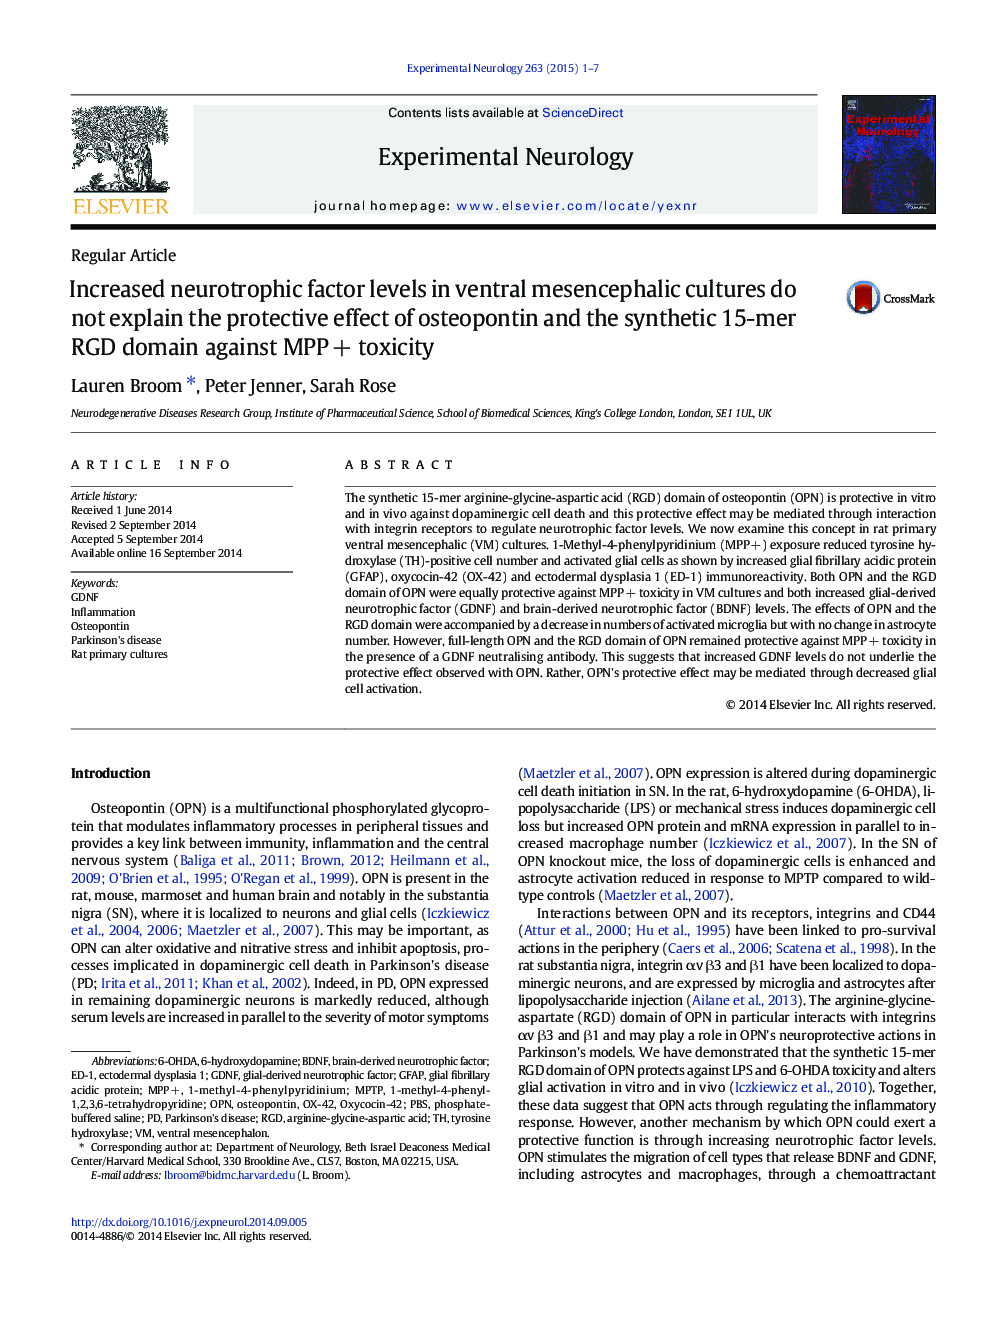 Increased neurotrophic factor levels in ventral mesencephalic cultures do not explain the protective effect of osteopontin and the synthetic 15-mer RGD domain against MPPÂ + toxicity